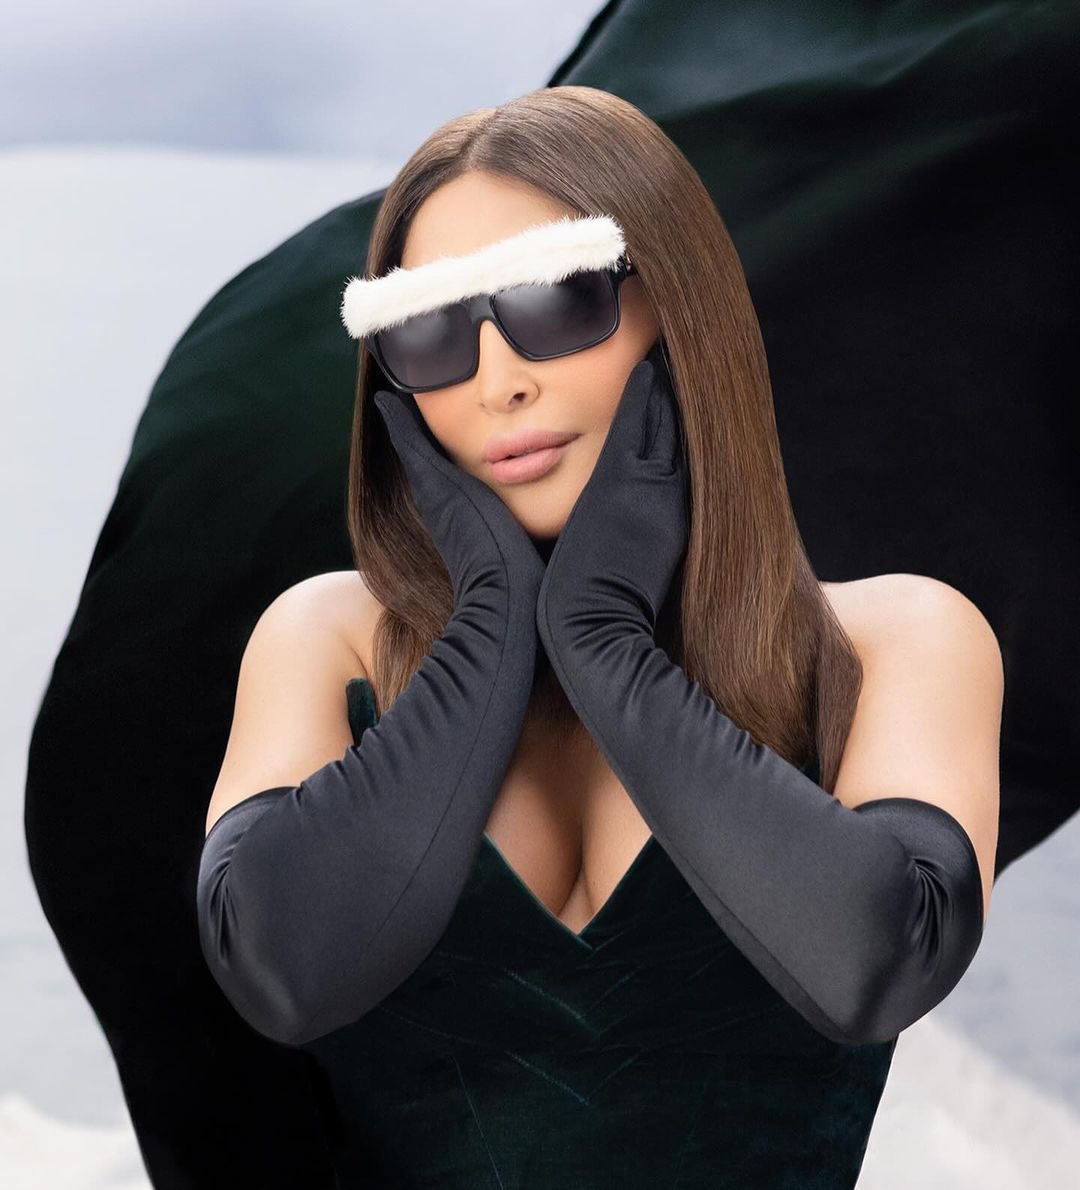 Lebanese superstar #Elissa's new surprise Album 'Ana Sekketen', her first production under her own record label, E-Records, has debuted at #1 on Anghami in nearly every Arab country with almost 600K plays on its first day and over 10 Million so far with over 7 Million on Spotify